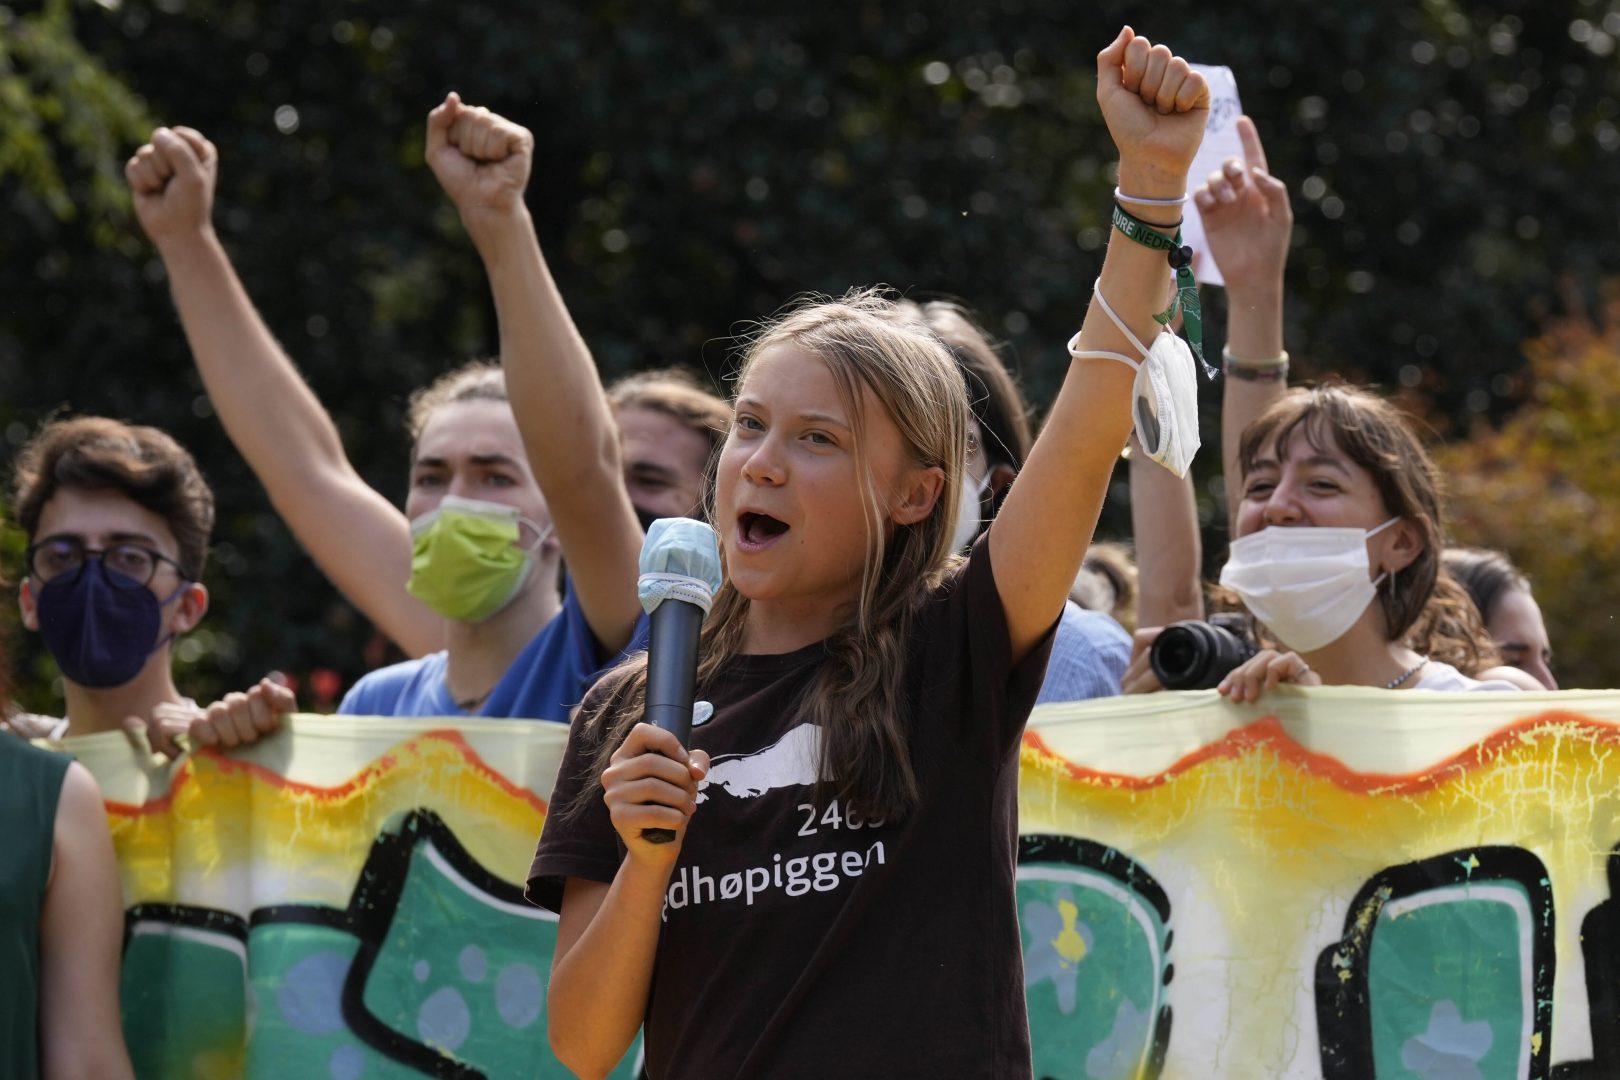 Climate activist, Greta Thunberg, of Sweden, delivers her speech during a Fridays for Future demonstration in Milan, Italy, Friday, Oct. 1, 2021.